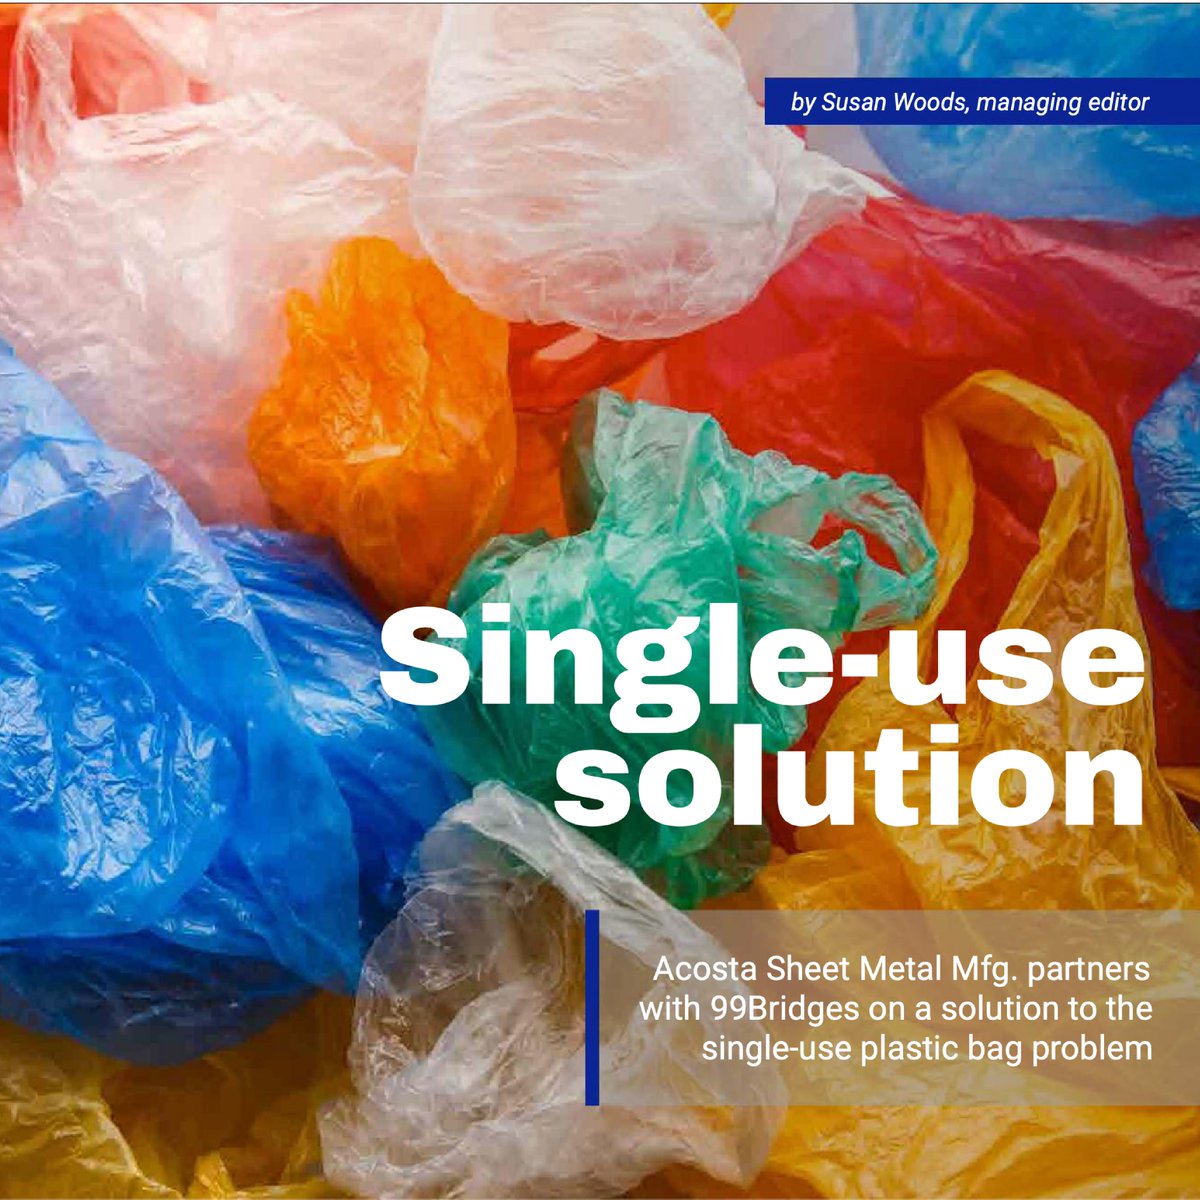 #acostamfg and #99Bridges created a real, tangible solution, powered by #technology, to battle against single-use #plastics. 
🔗 Thanks for the feature #ShopFloorLasersMagazine: hubs.li/Q01_Hr0X0 #plasticban #circulareconomy #sheetmetal #lasercutting #sheetmetalshop